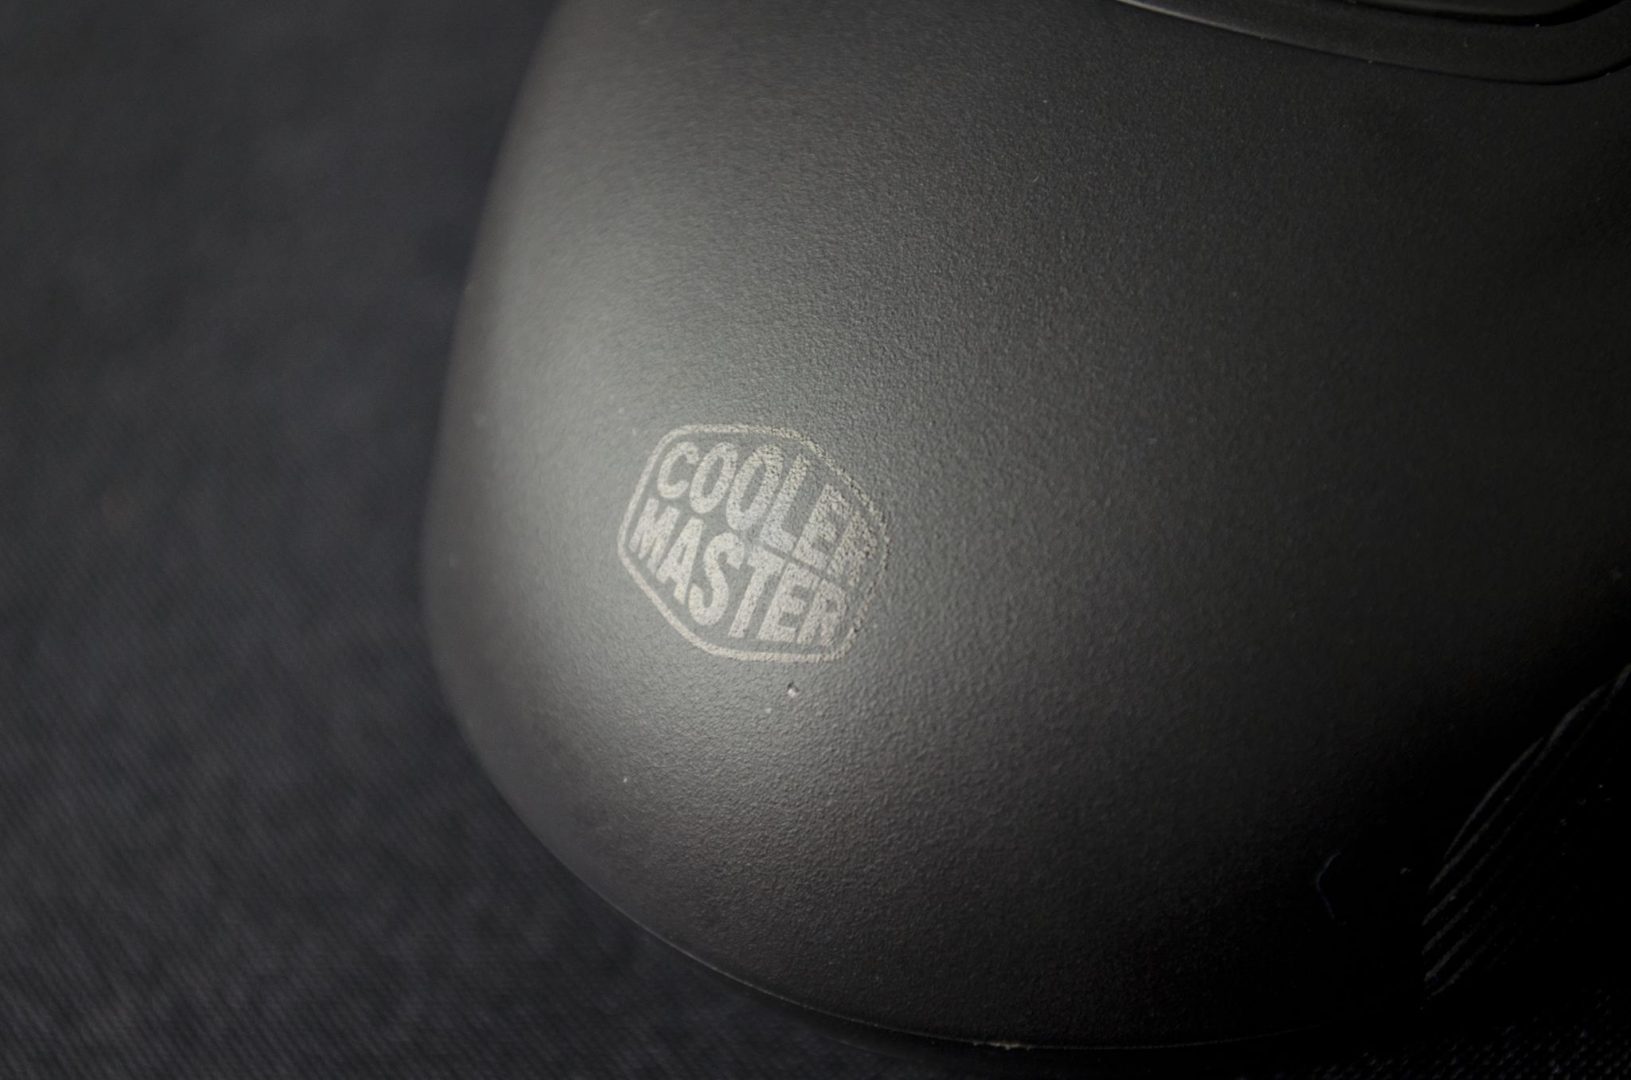 CM Storm Xornet II Gaming Mouse Review